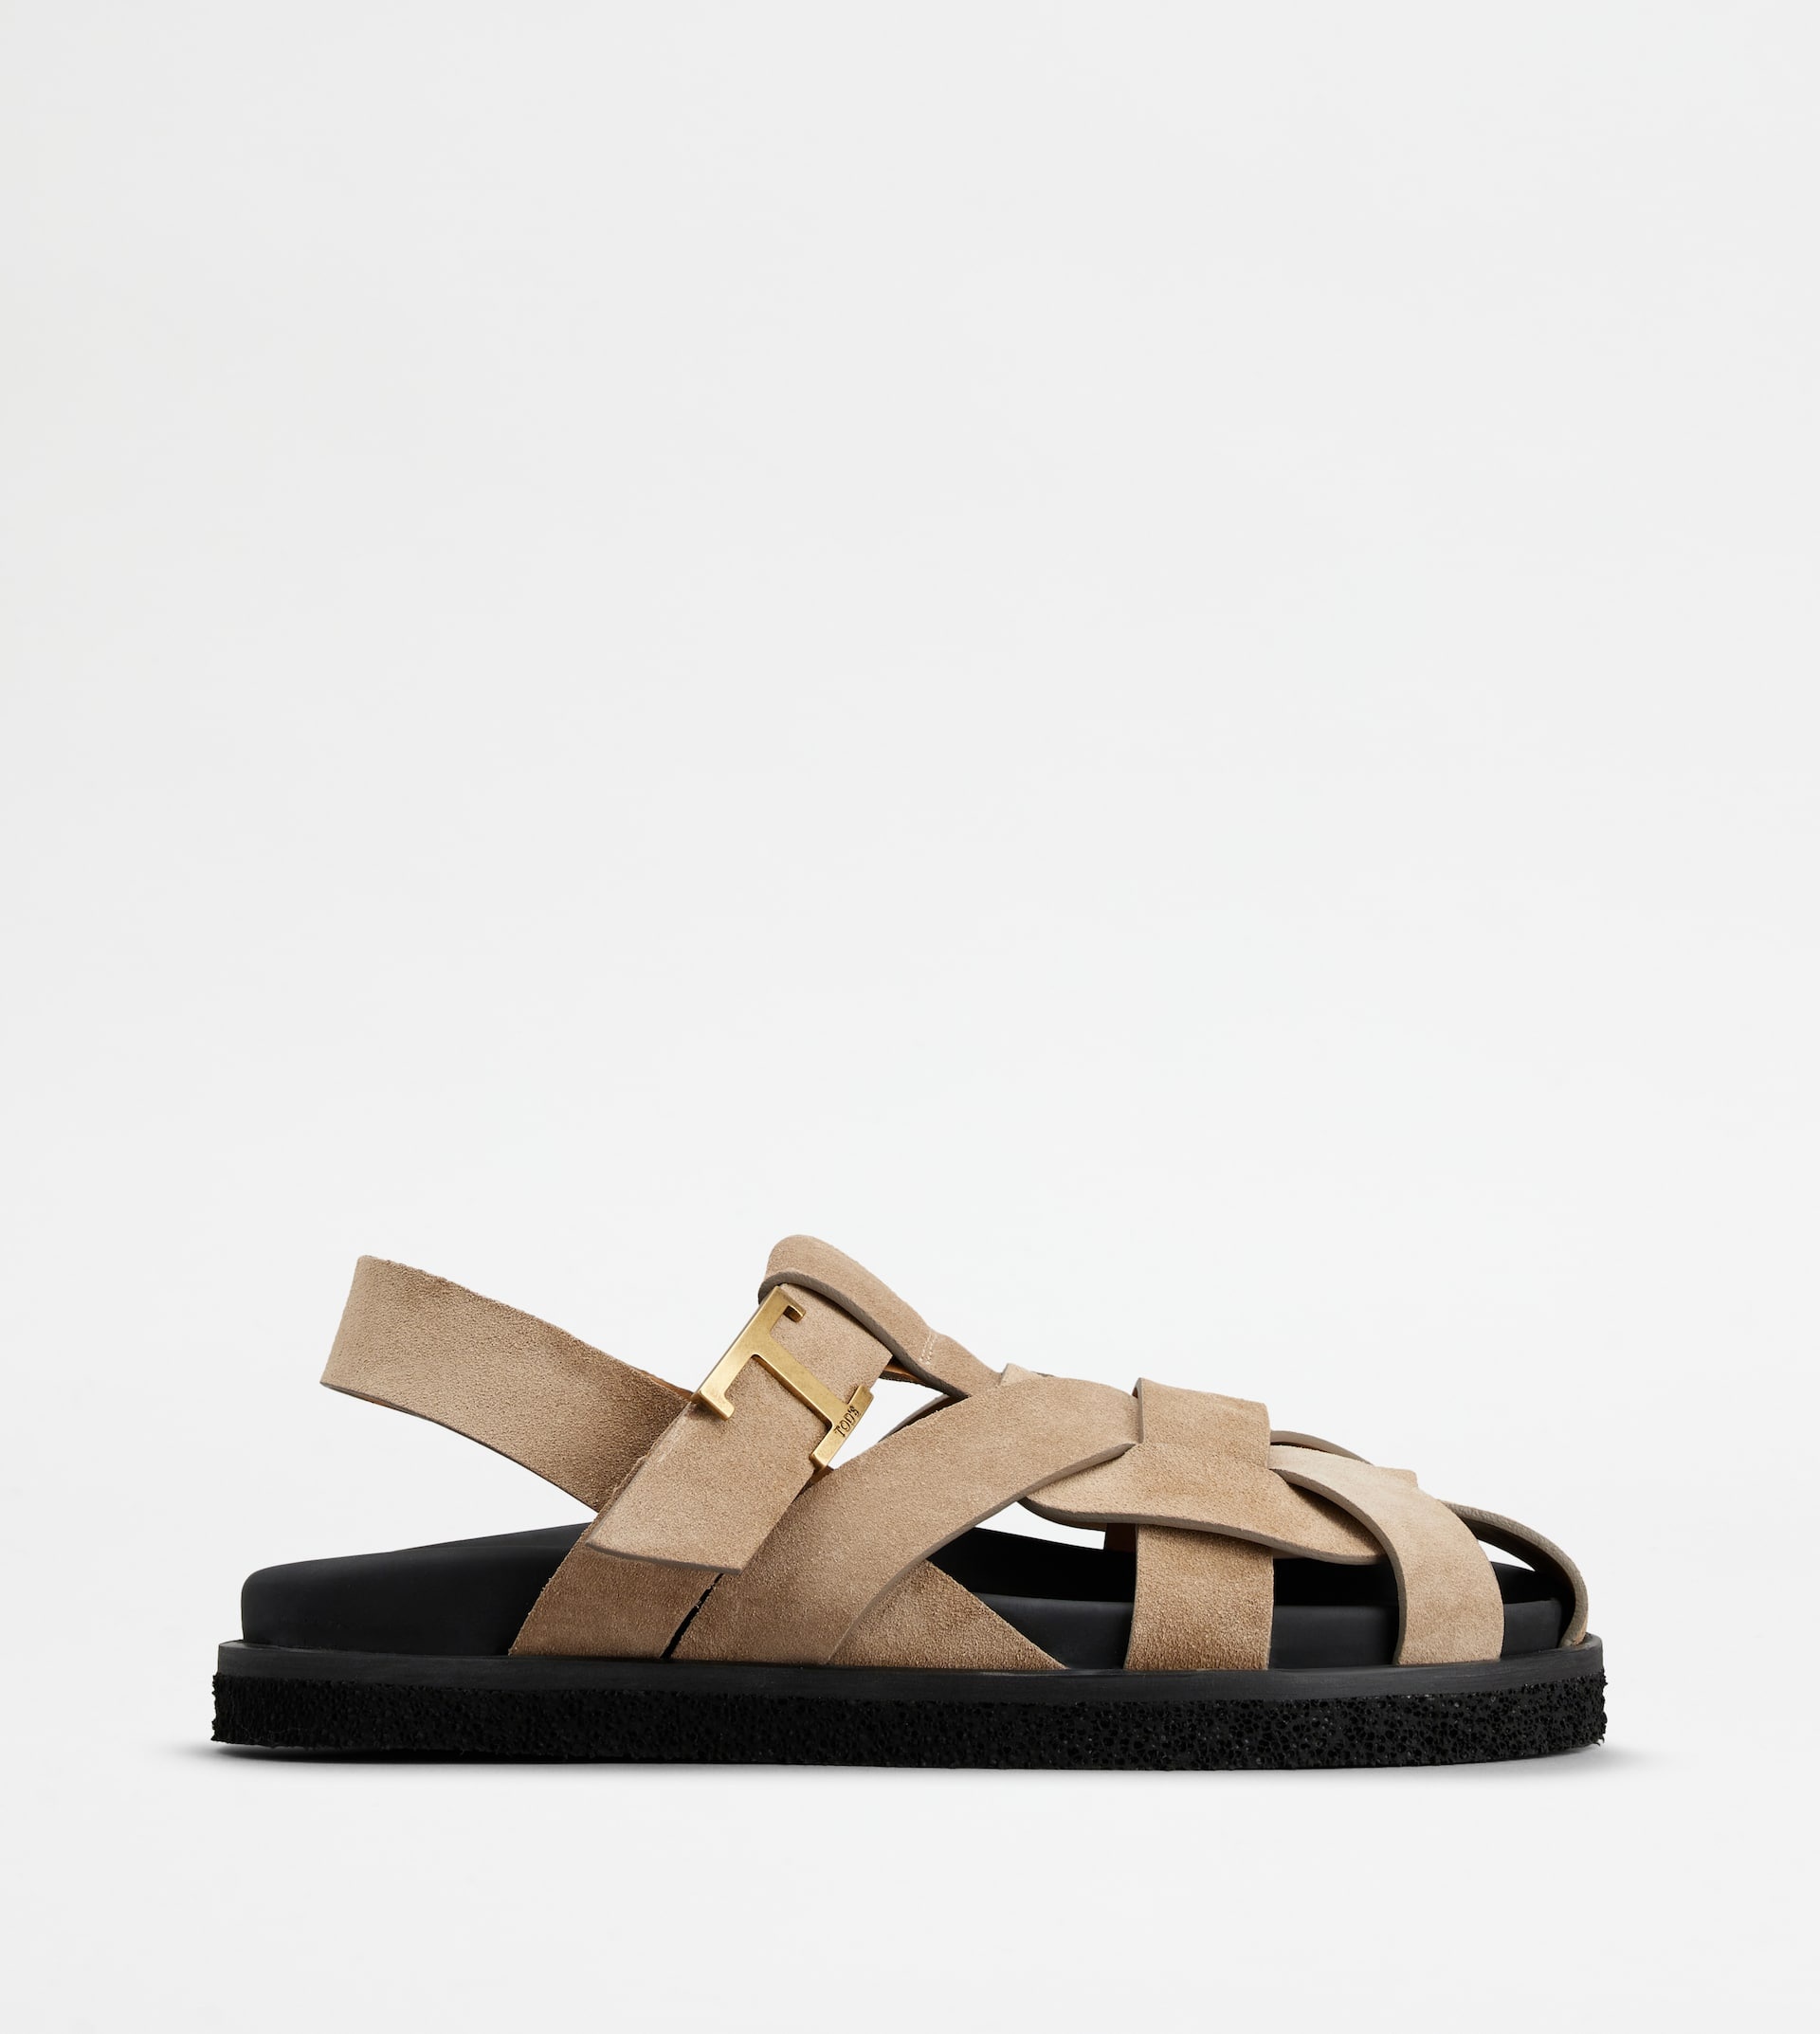 T TIMELESS SANDALS IN SUEDE - BROWN - 1